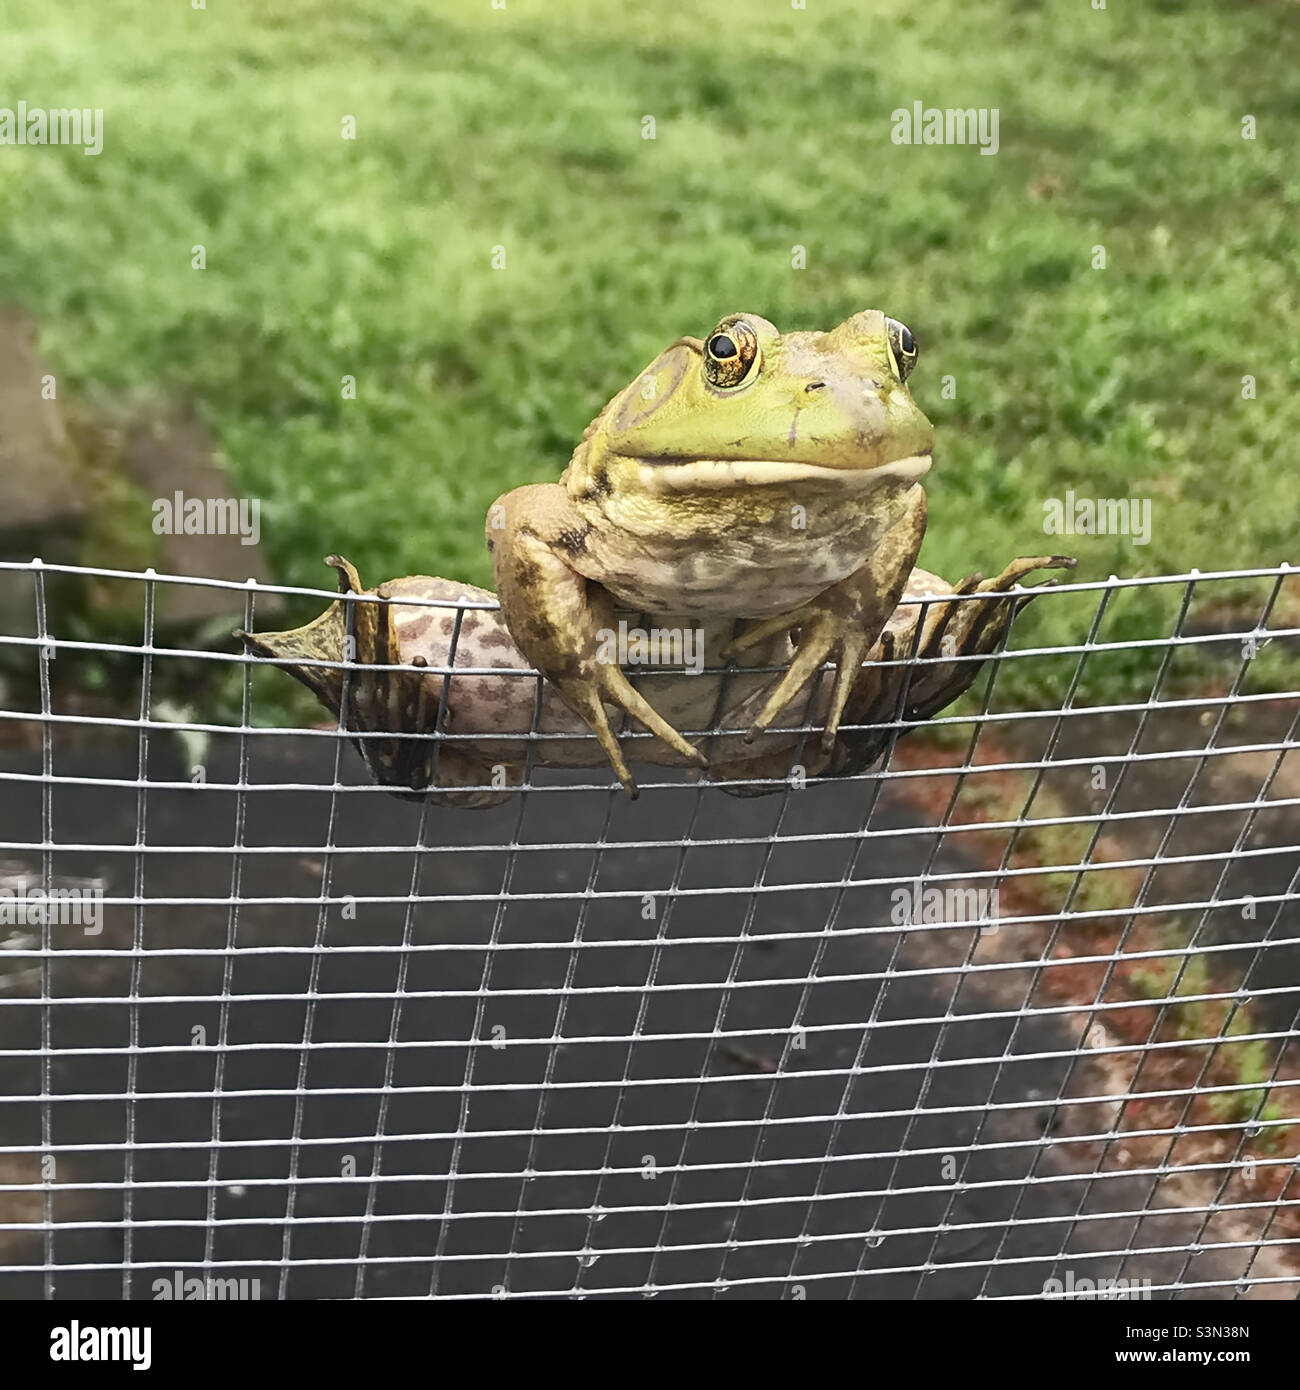 One male American bullfrog is perched on a chain link fence and looking at the camera. Stock Photo